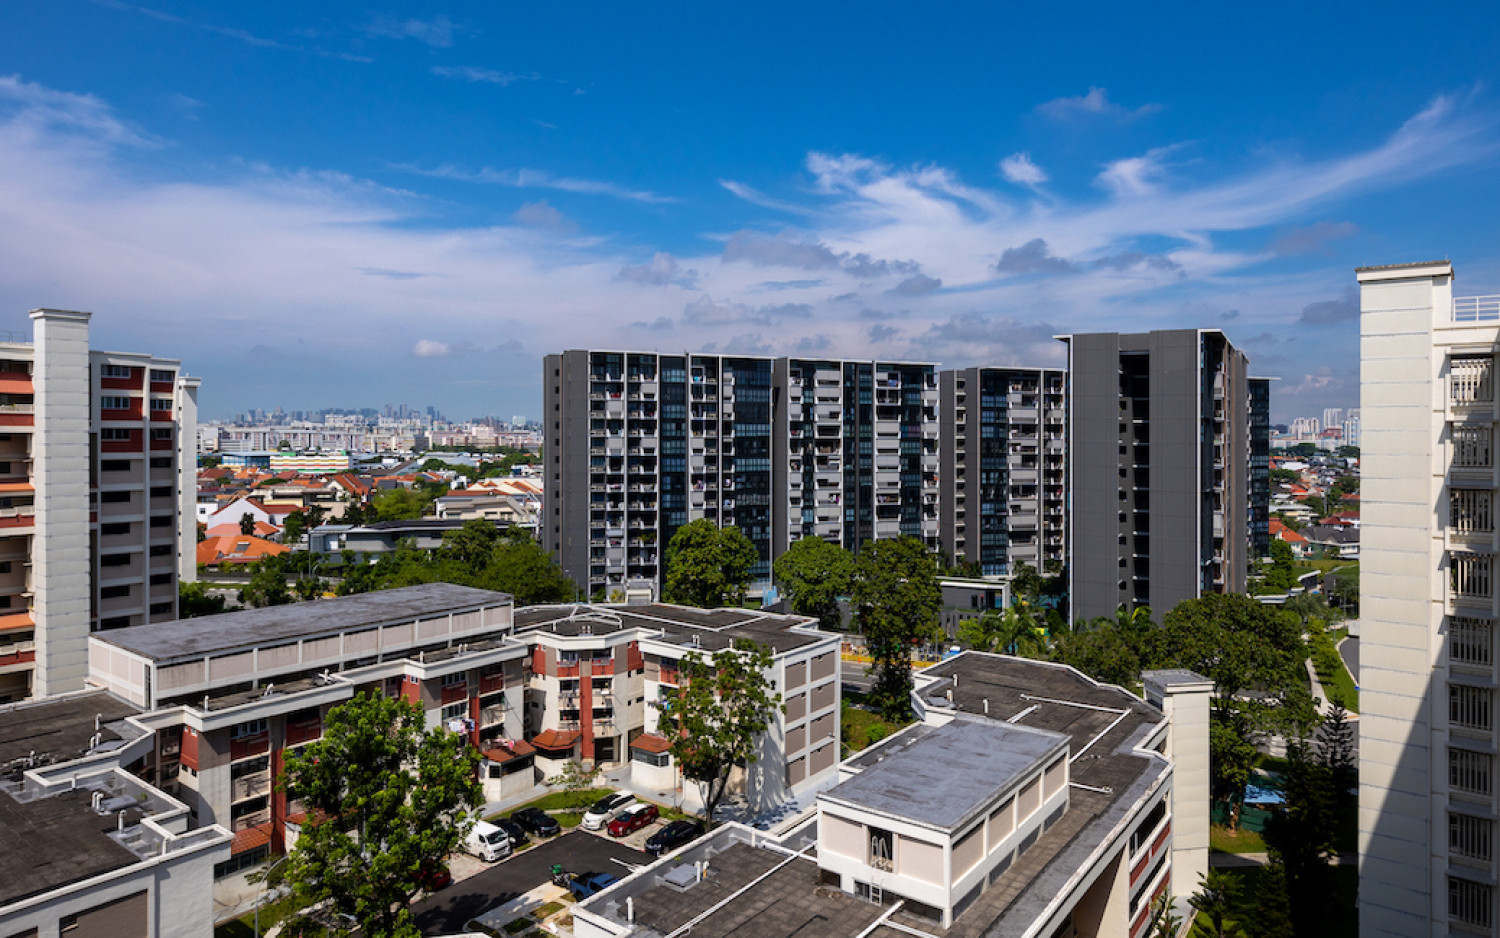 Serangoon saw highest application rate in May BTO launch - HDB Property News